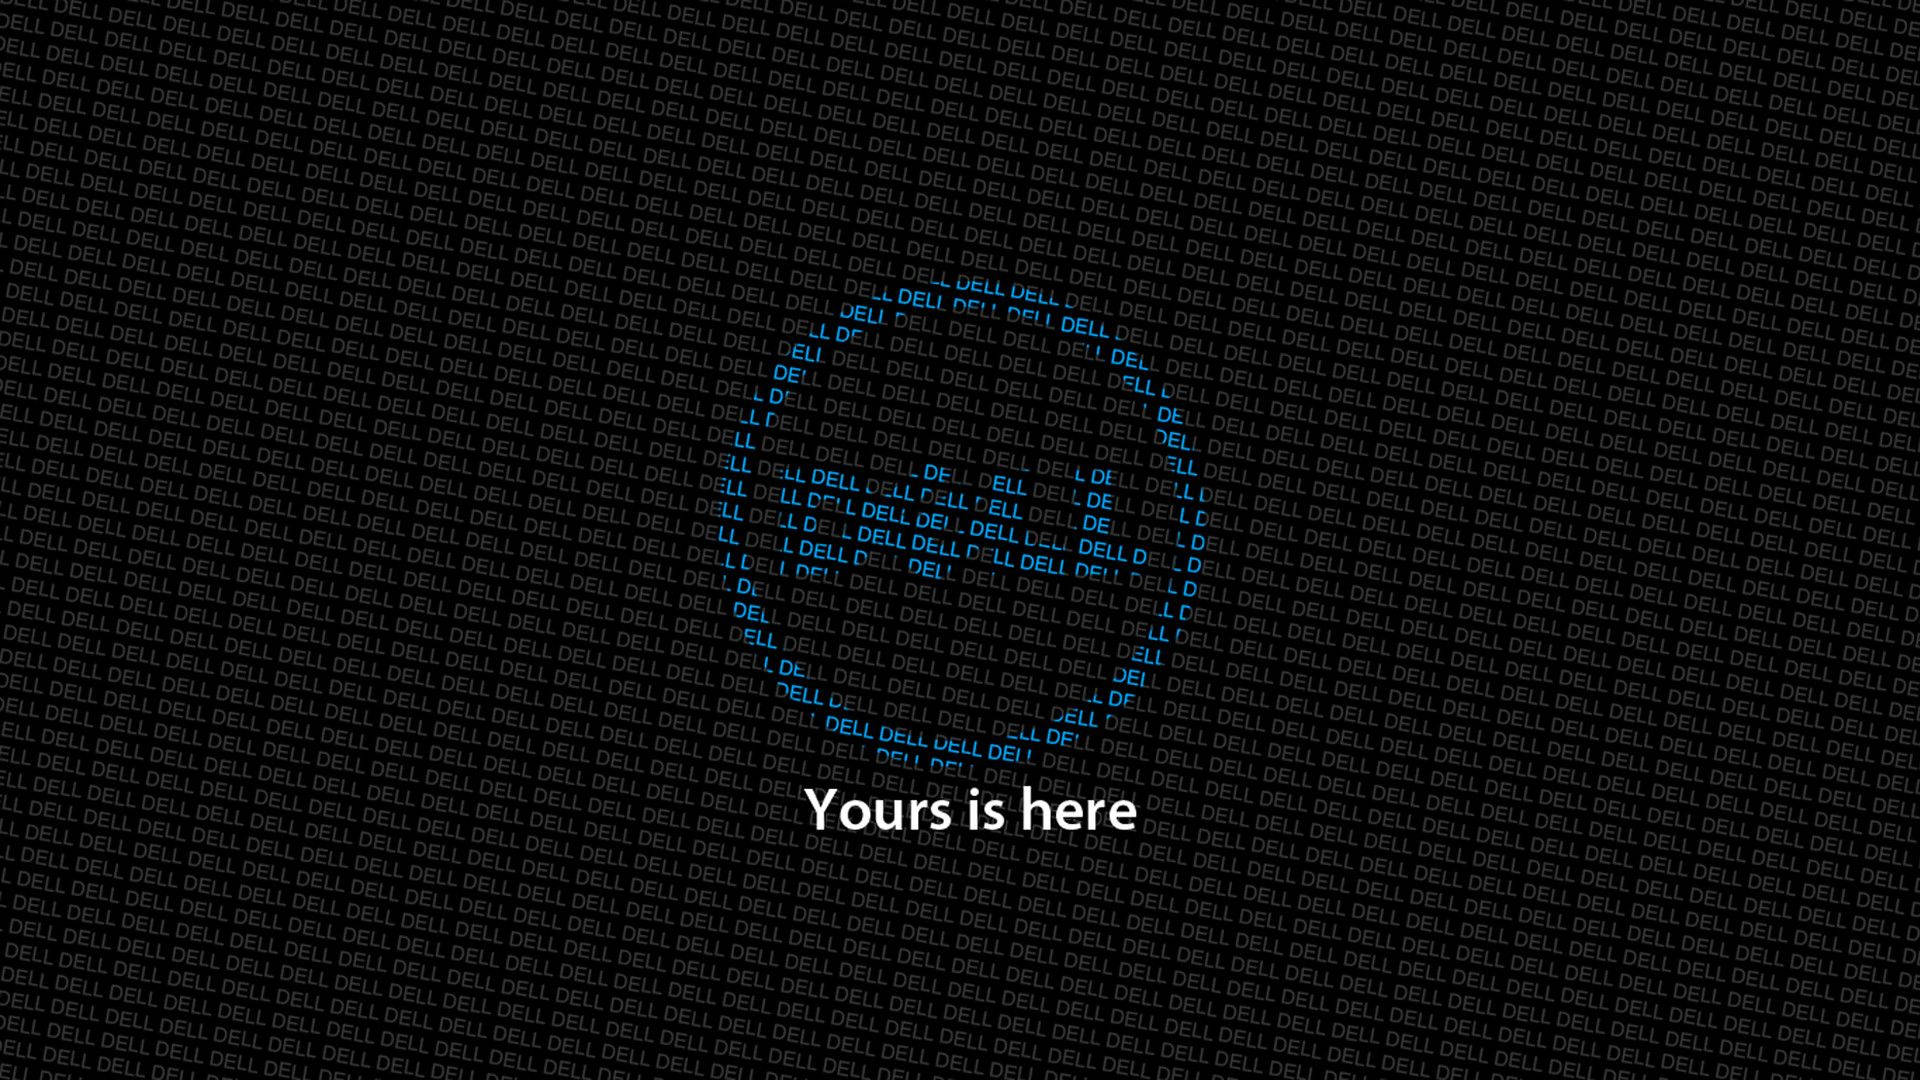 Dell Yours Is Here Mosaic Background